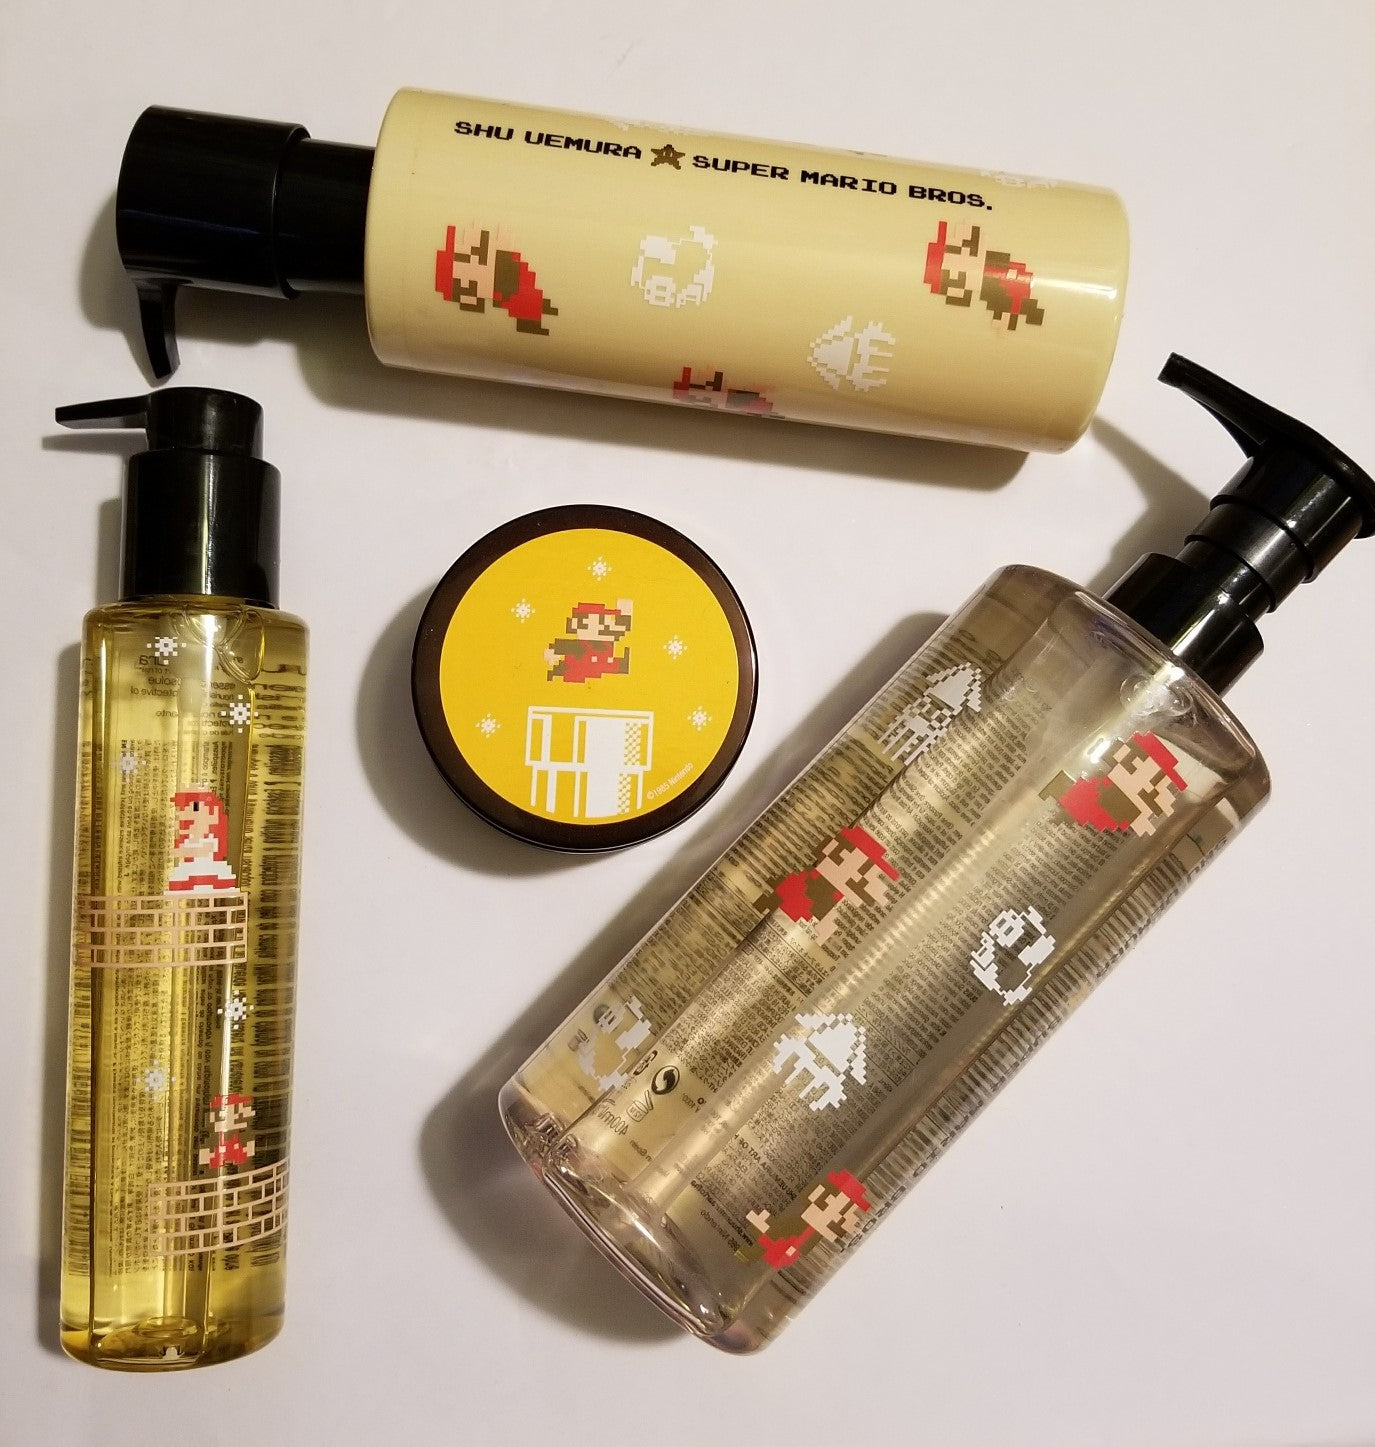 Review, Photos, Ingredients, Hairstyle, Haircare Trend 2017, 2018, 2019: Shu Uemura x Super Mario Bros. Hair Collection, Master Wax, Cleansing Oil Shampoo & Conditioner, Essence Absolue